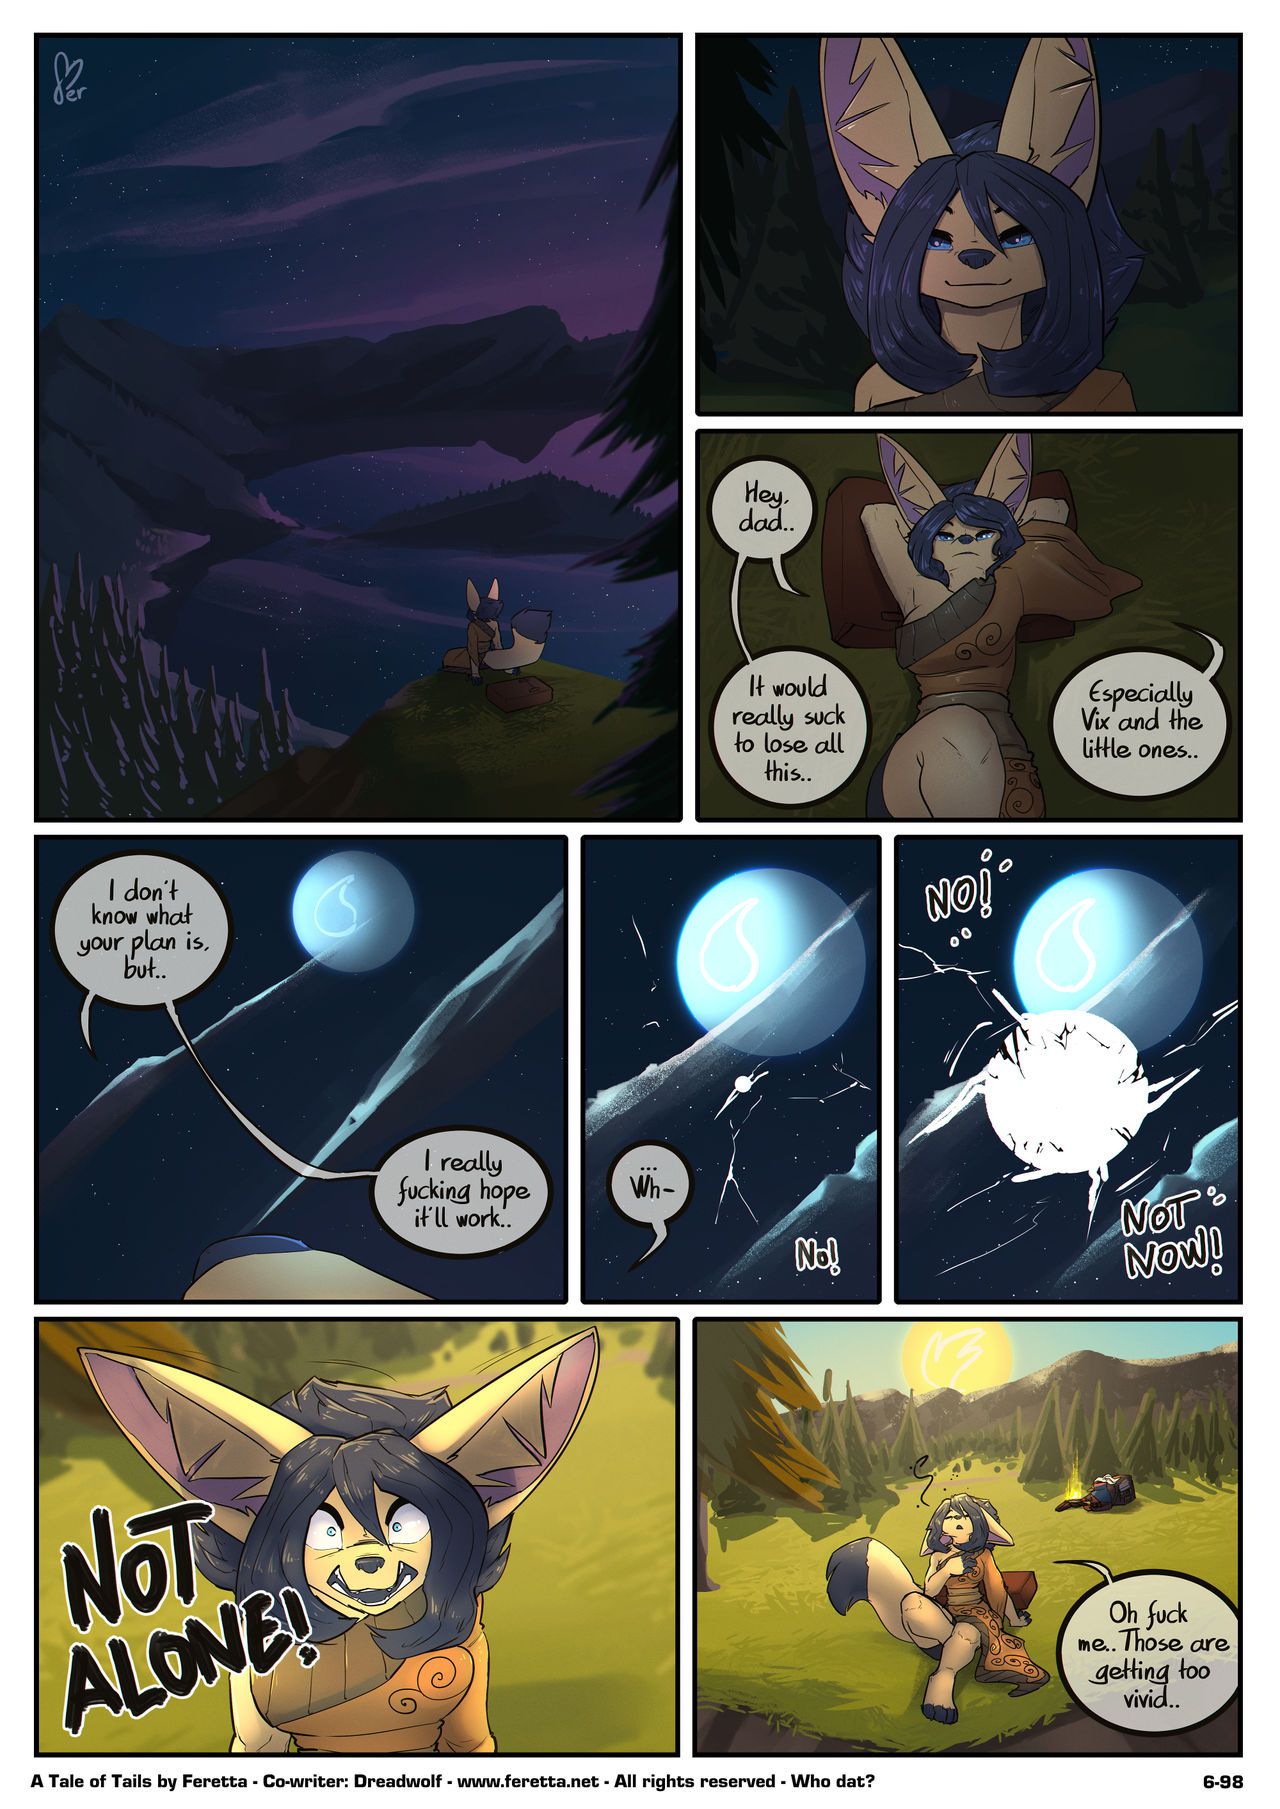 [Feretta] Farellian Legends: A Tale of Tails (w/Extras) [Ongoing] 393